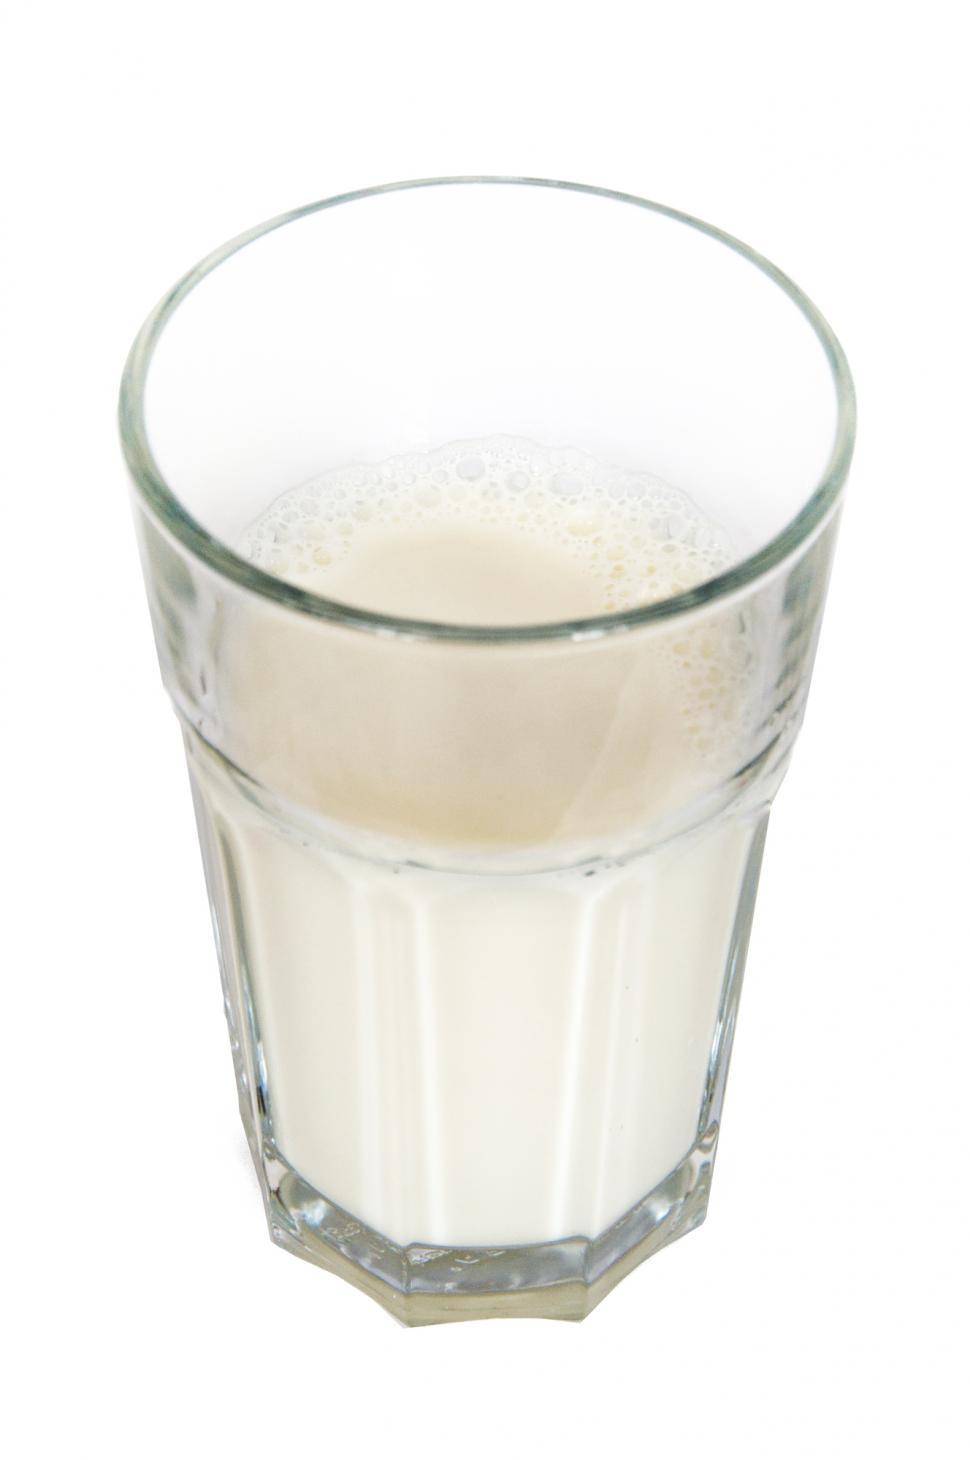 Free Image of Glass of milk 